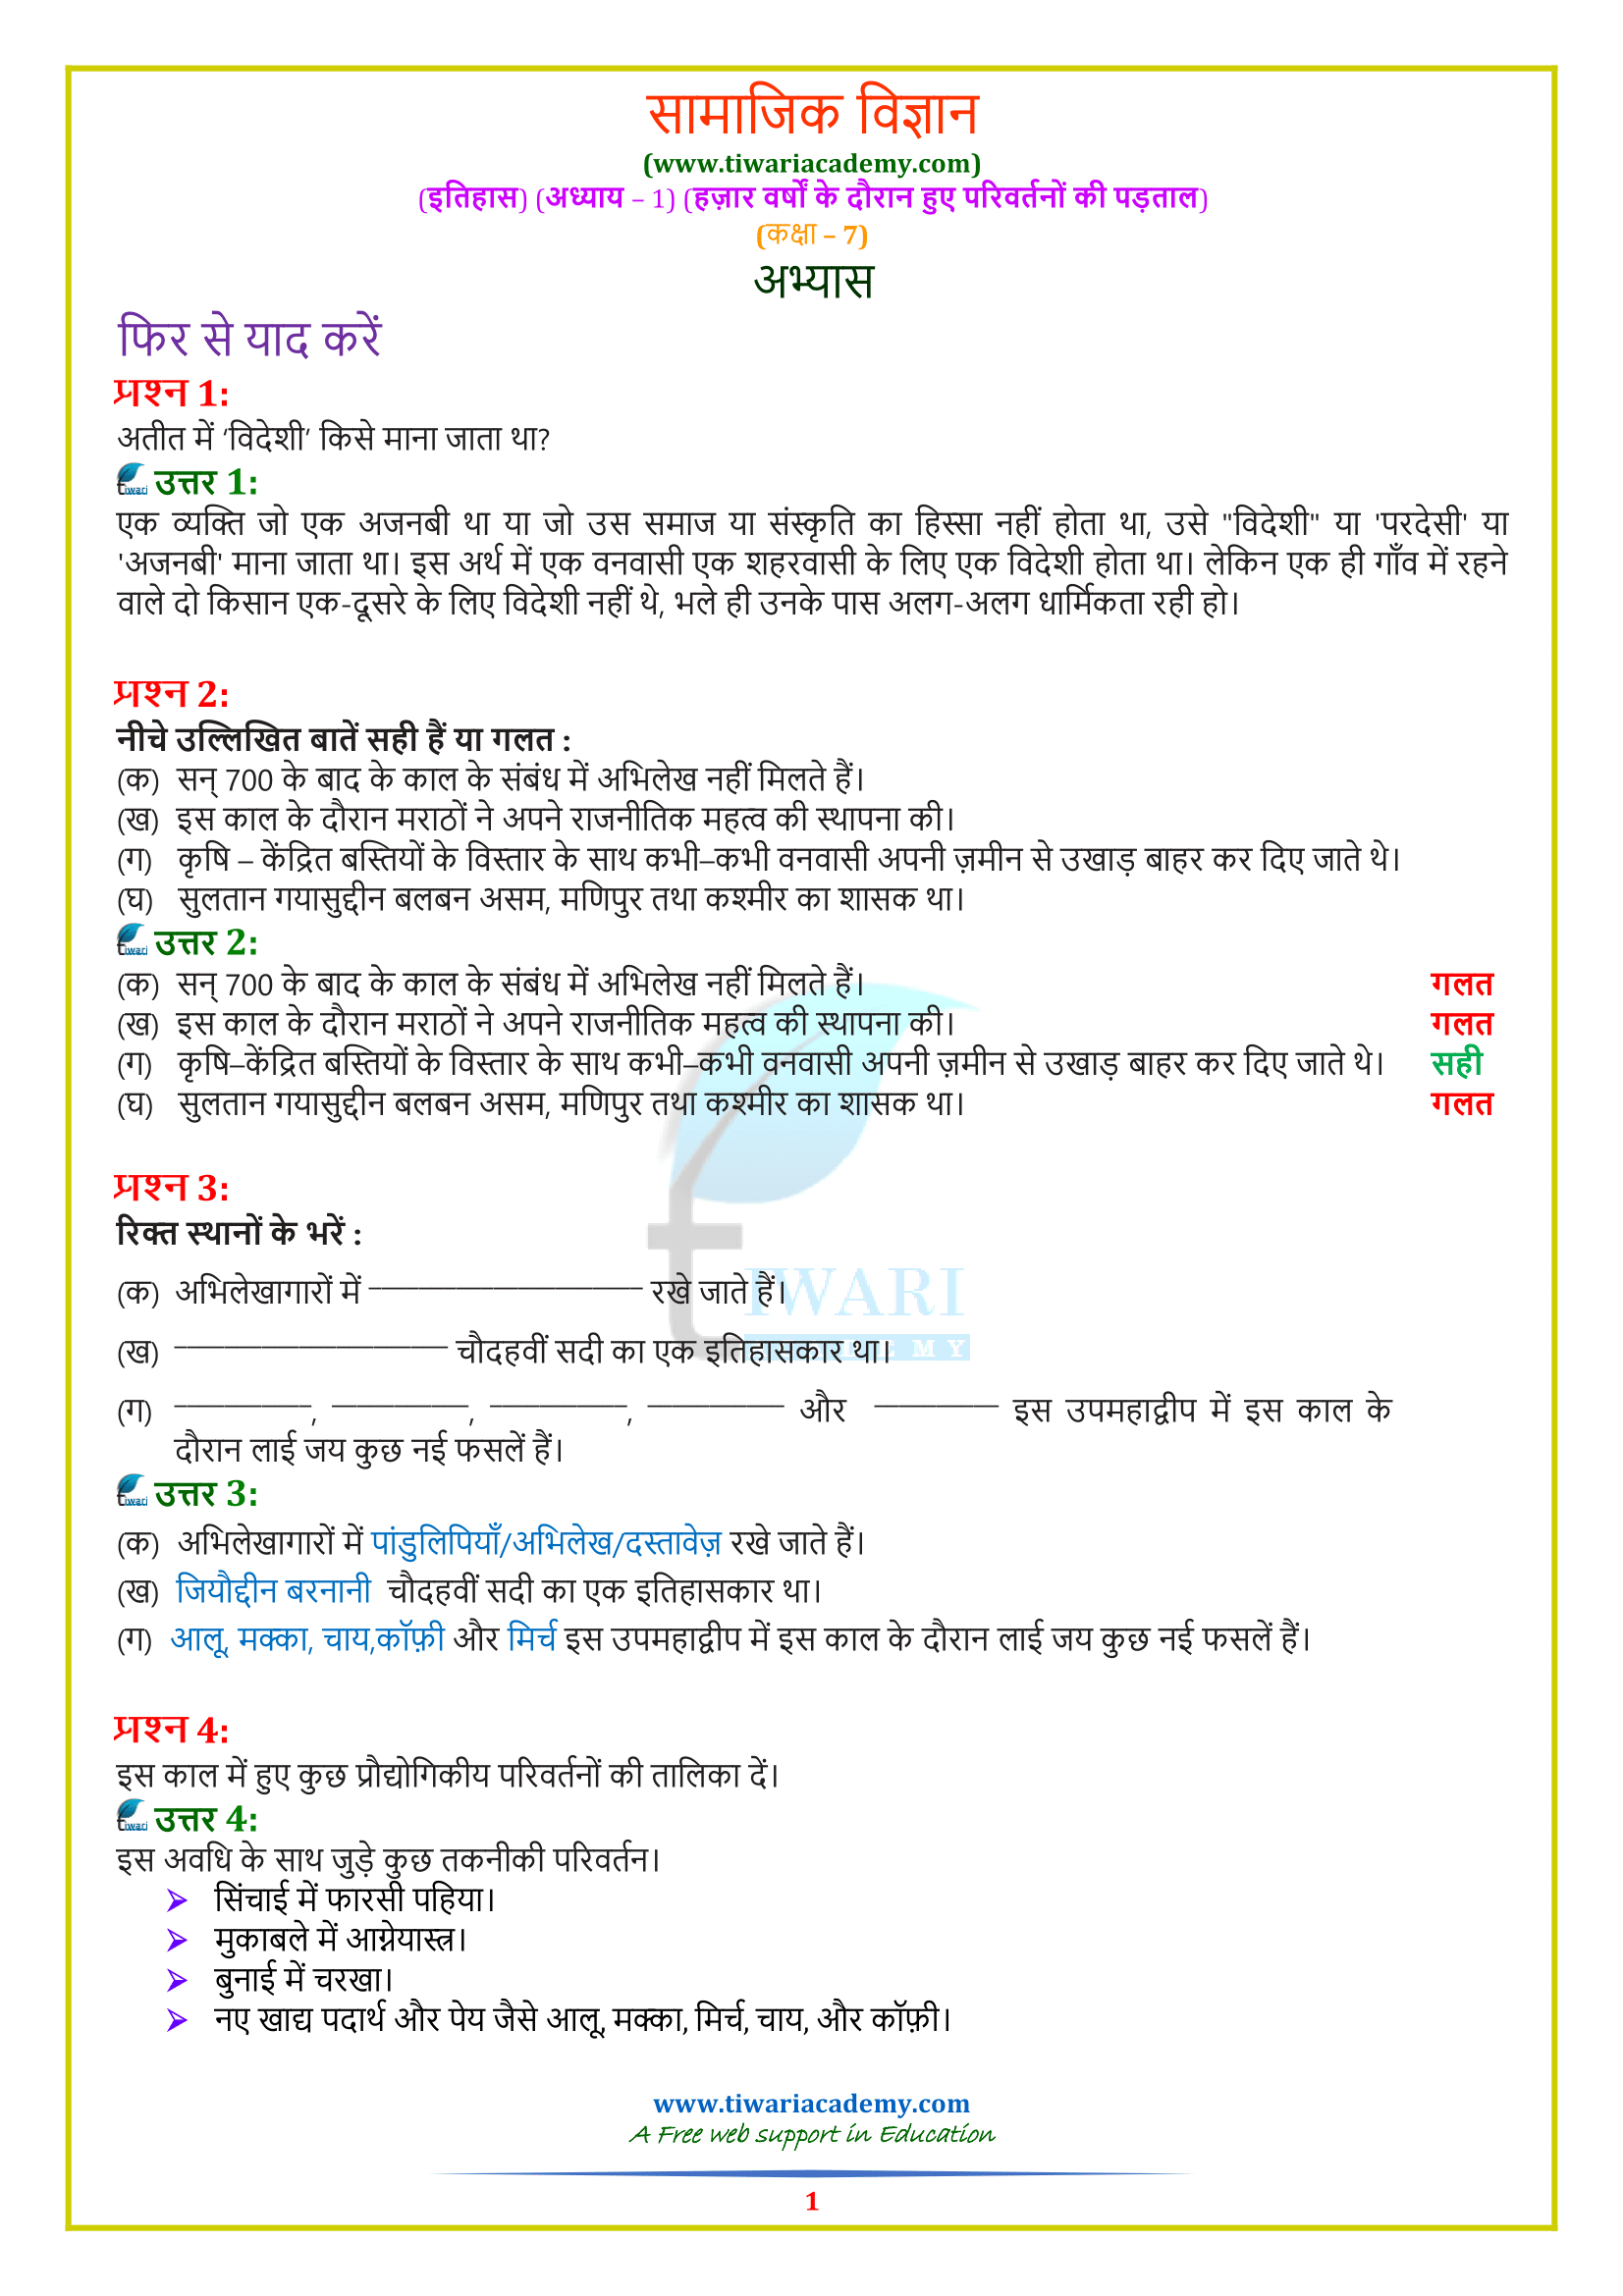 Class 7 s.st History chpater 1 solution in Hindi